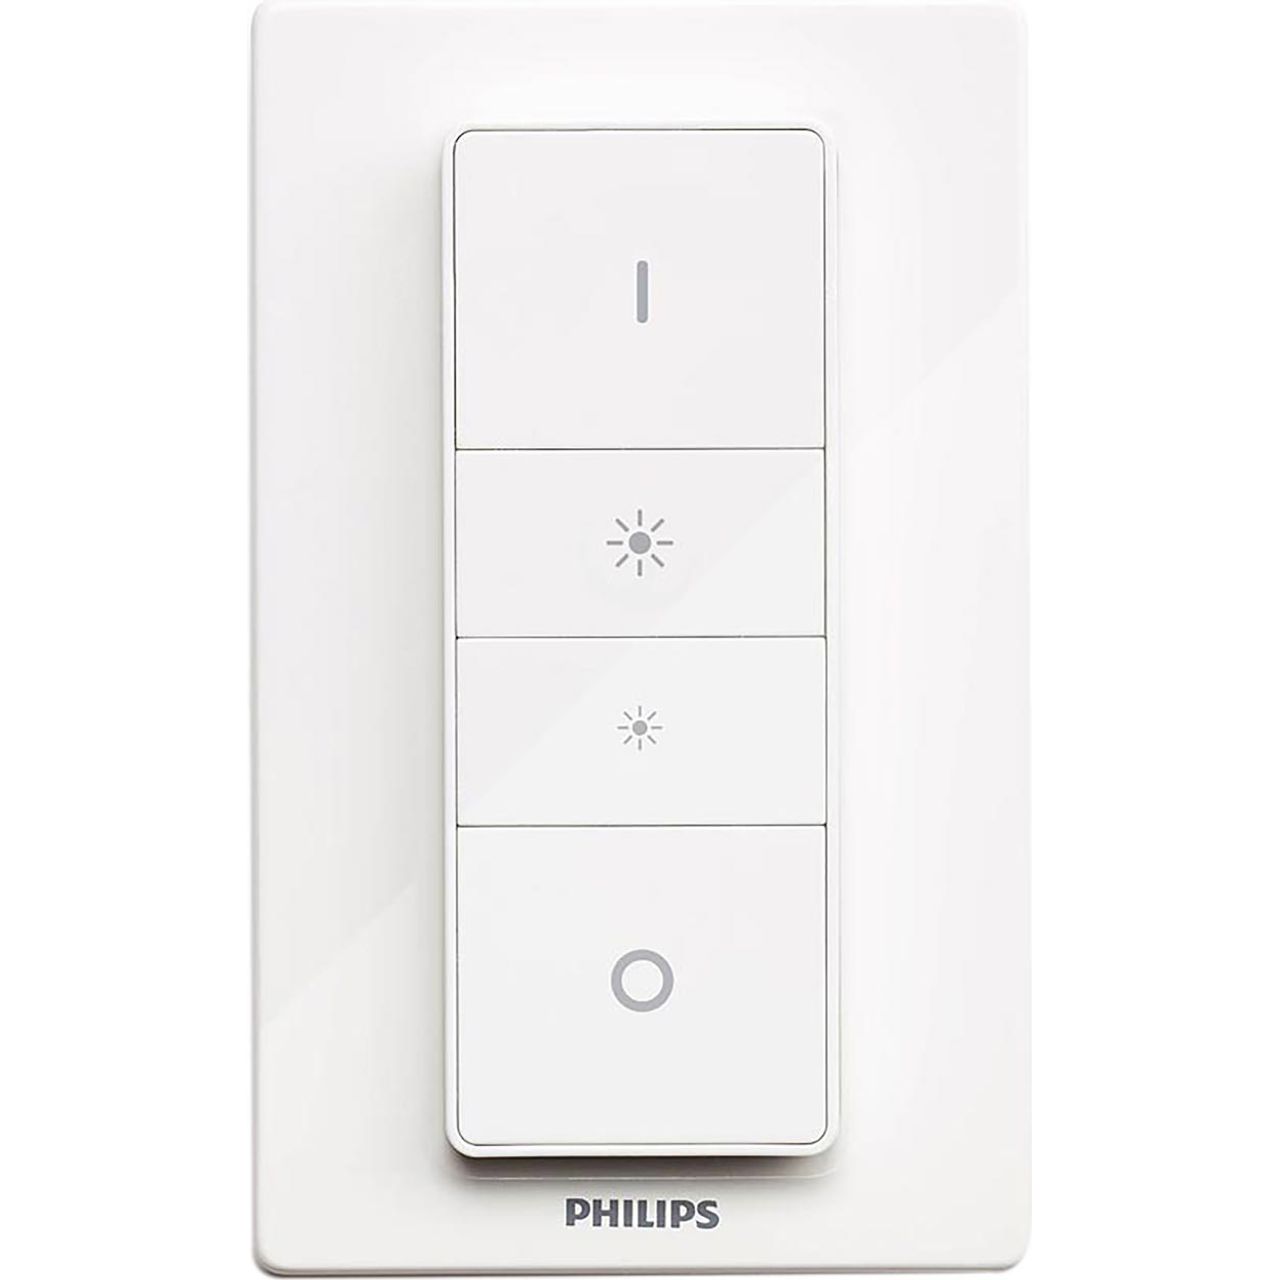 Philips Hue Dimmer Switch Review